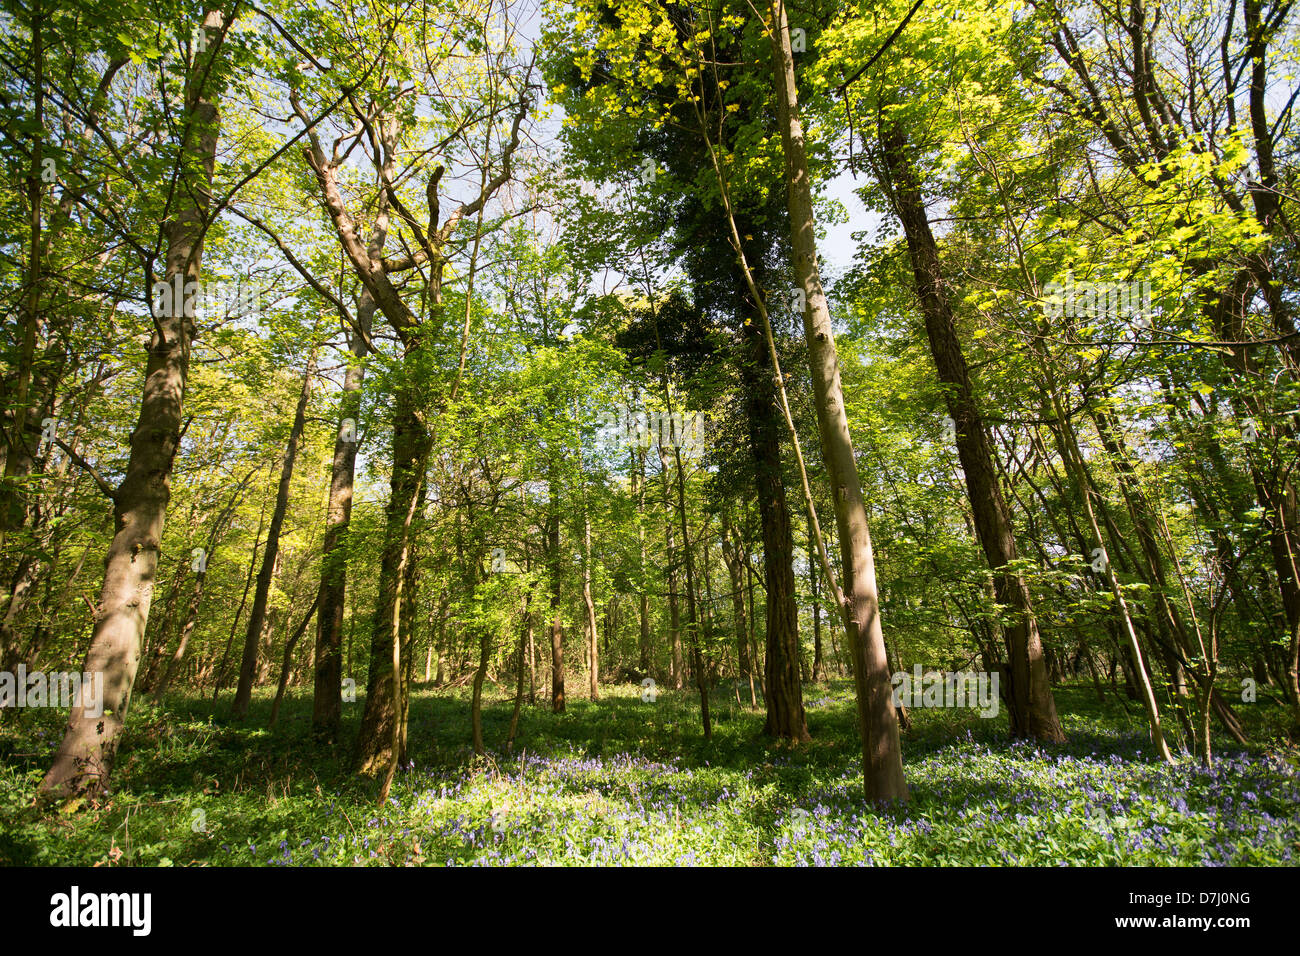 OXFORDSHIRE, UK. Spring in Wytham Great Wood near Oxford. 2013. Stock Photo